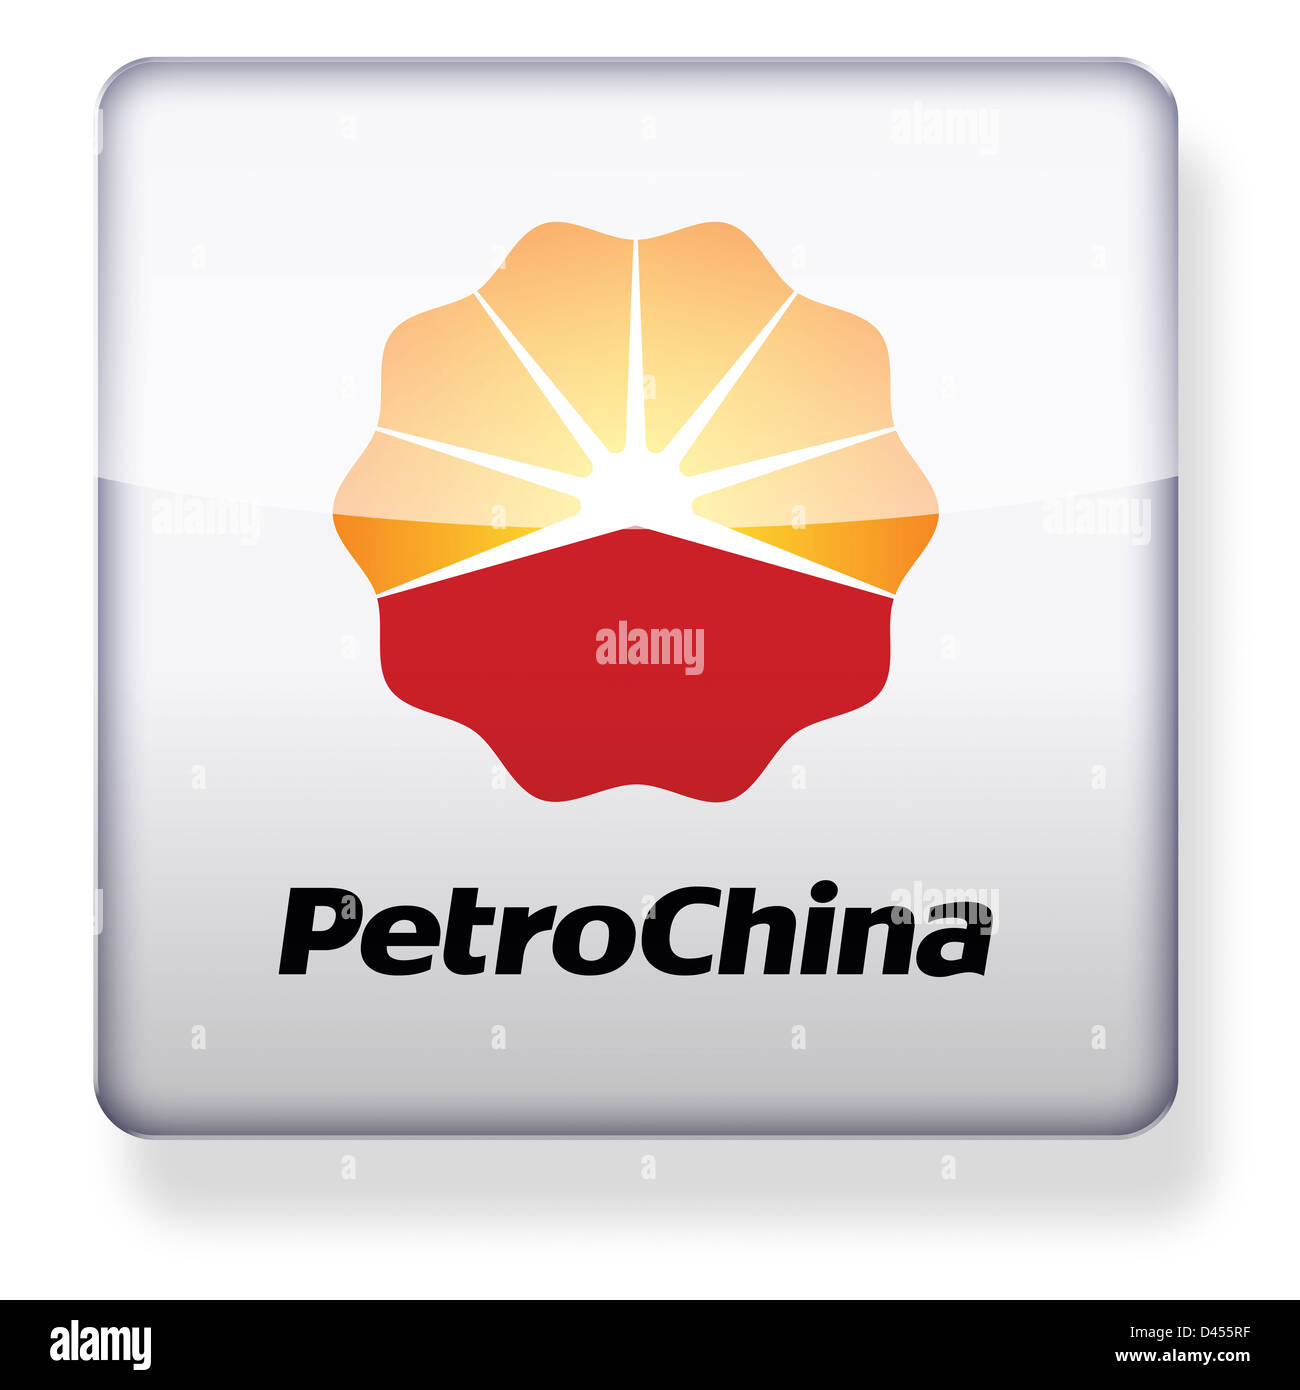 PetroChina logo as an app icon. Clipping path included. Stock Photo